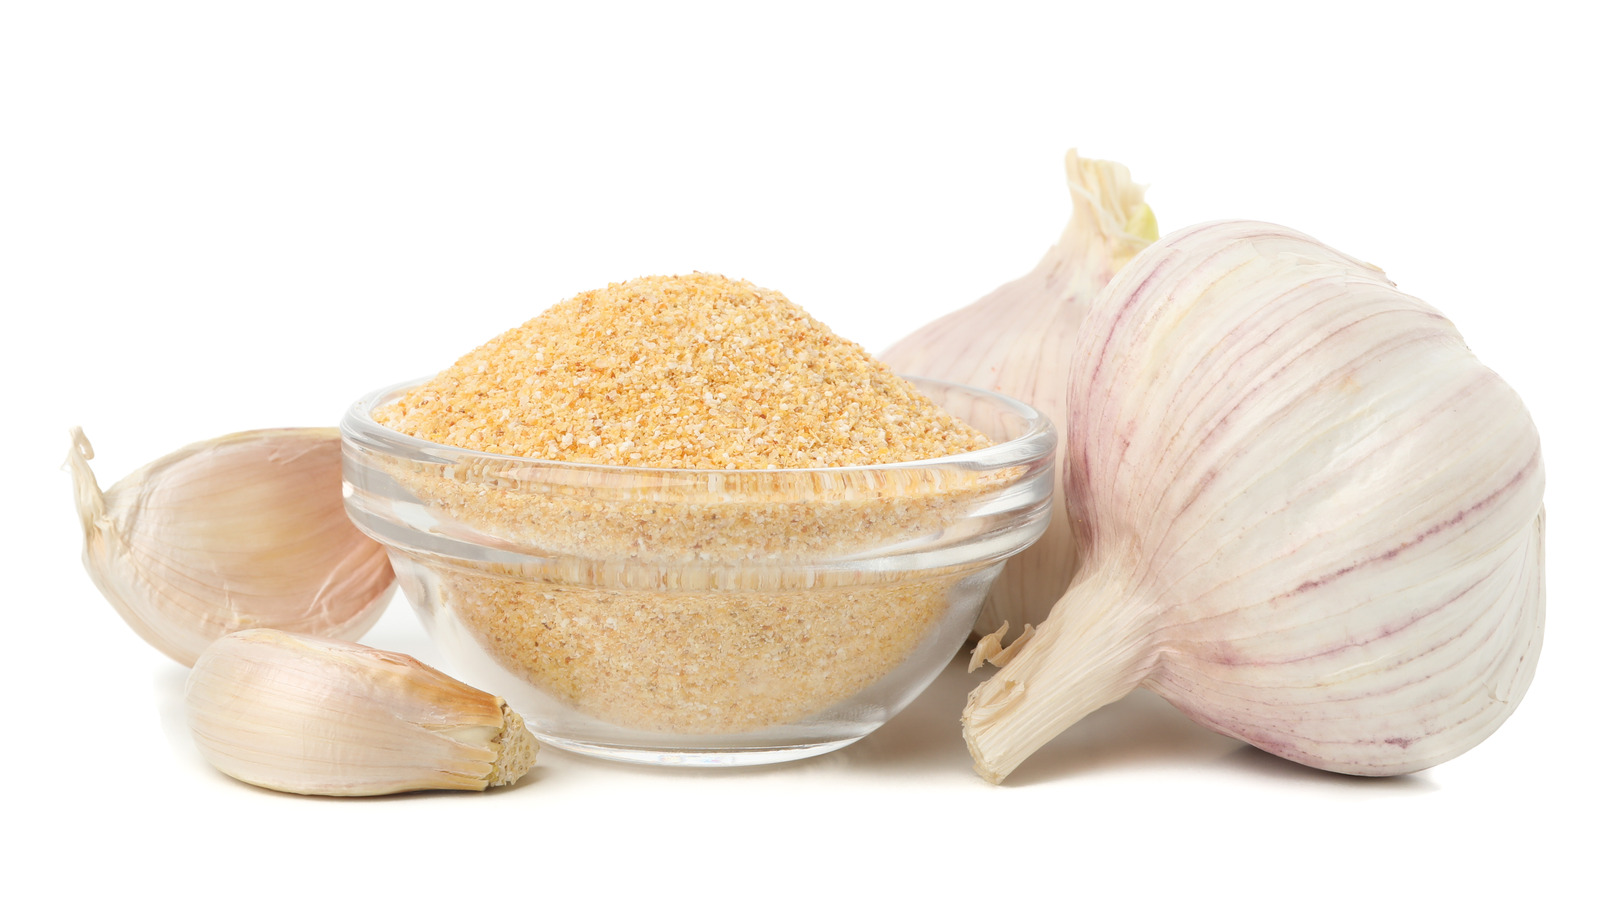 https://www.mashed.com/img/gallery/10-best-substitutes-for-garlic-powder/l-intro-1655994861.jpg